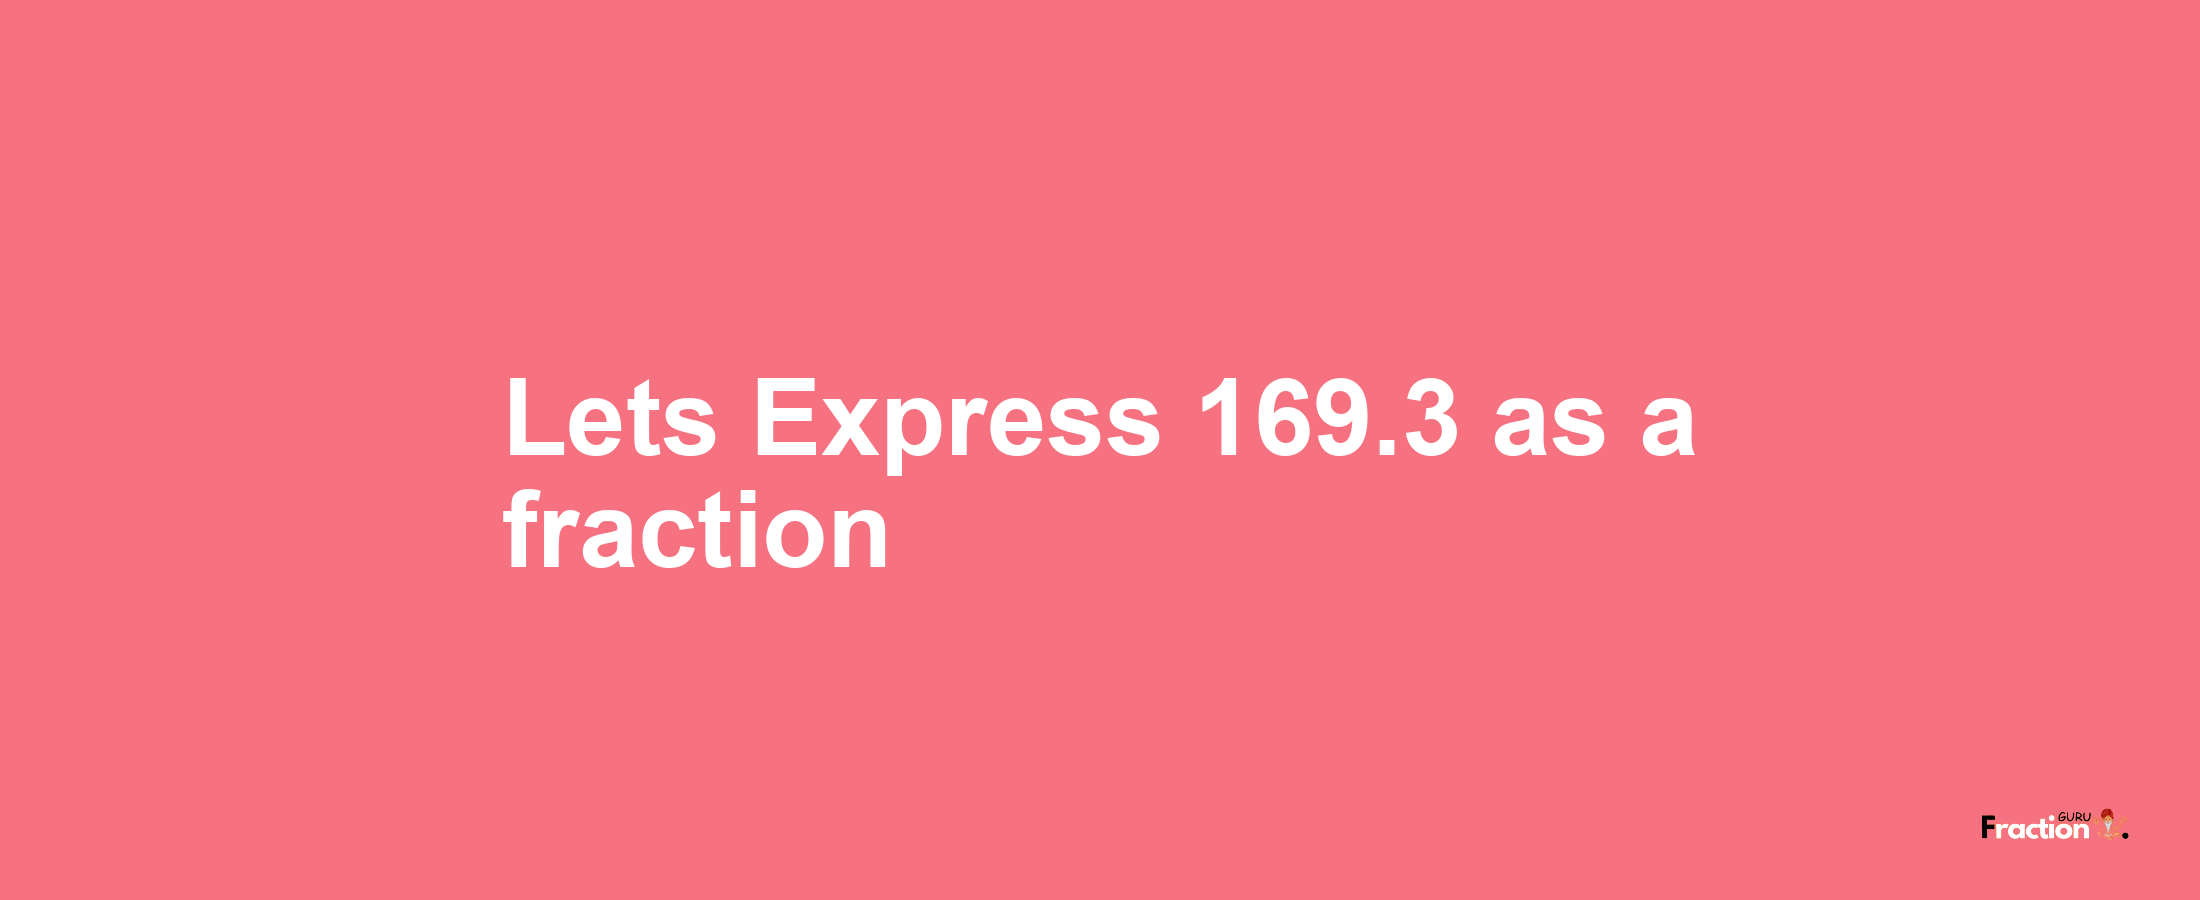 Lets Express 169.3 as afraction